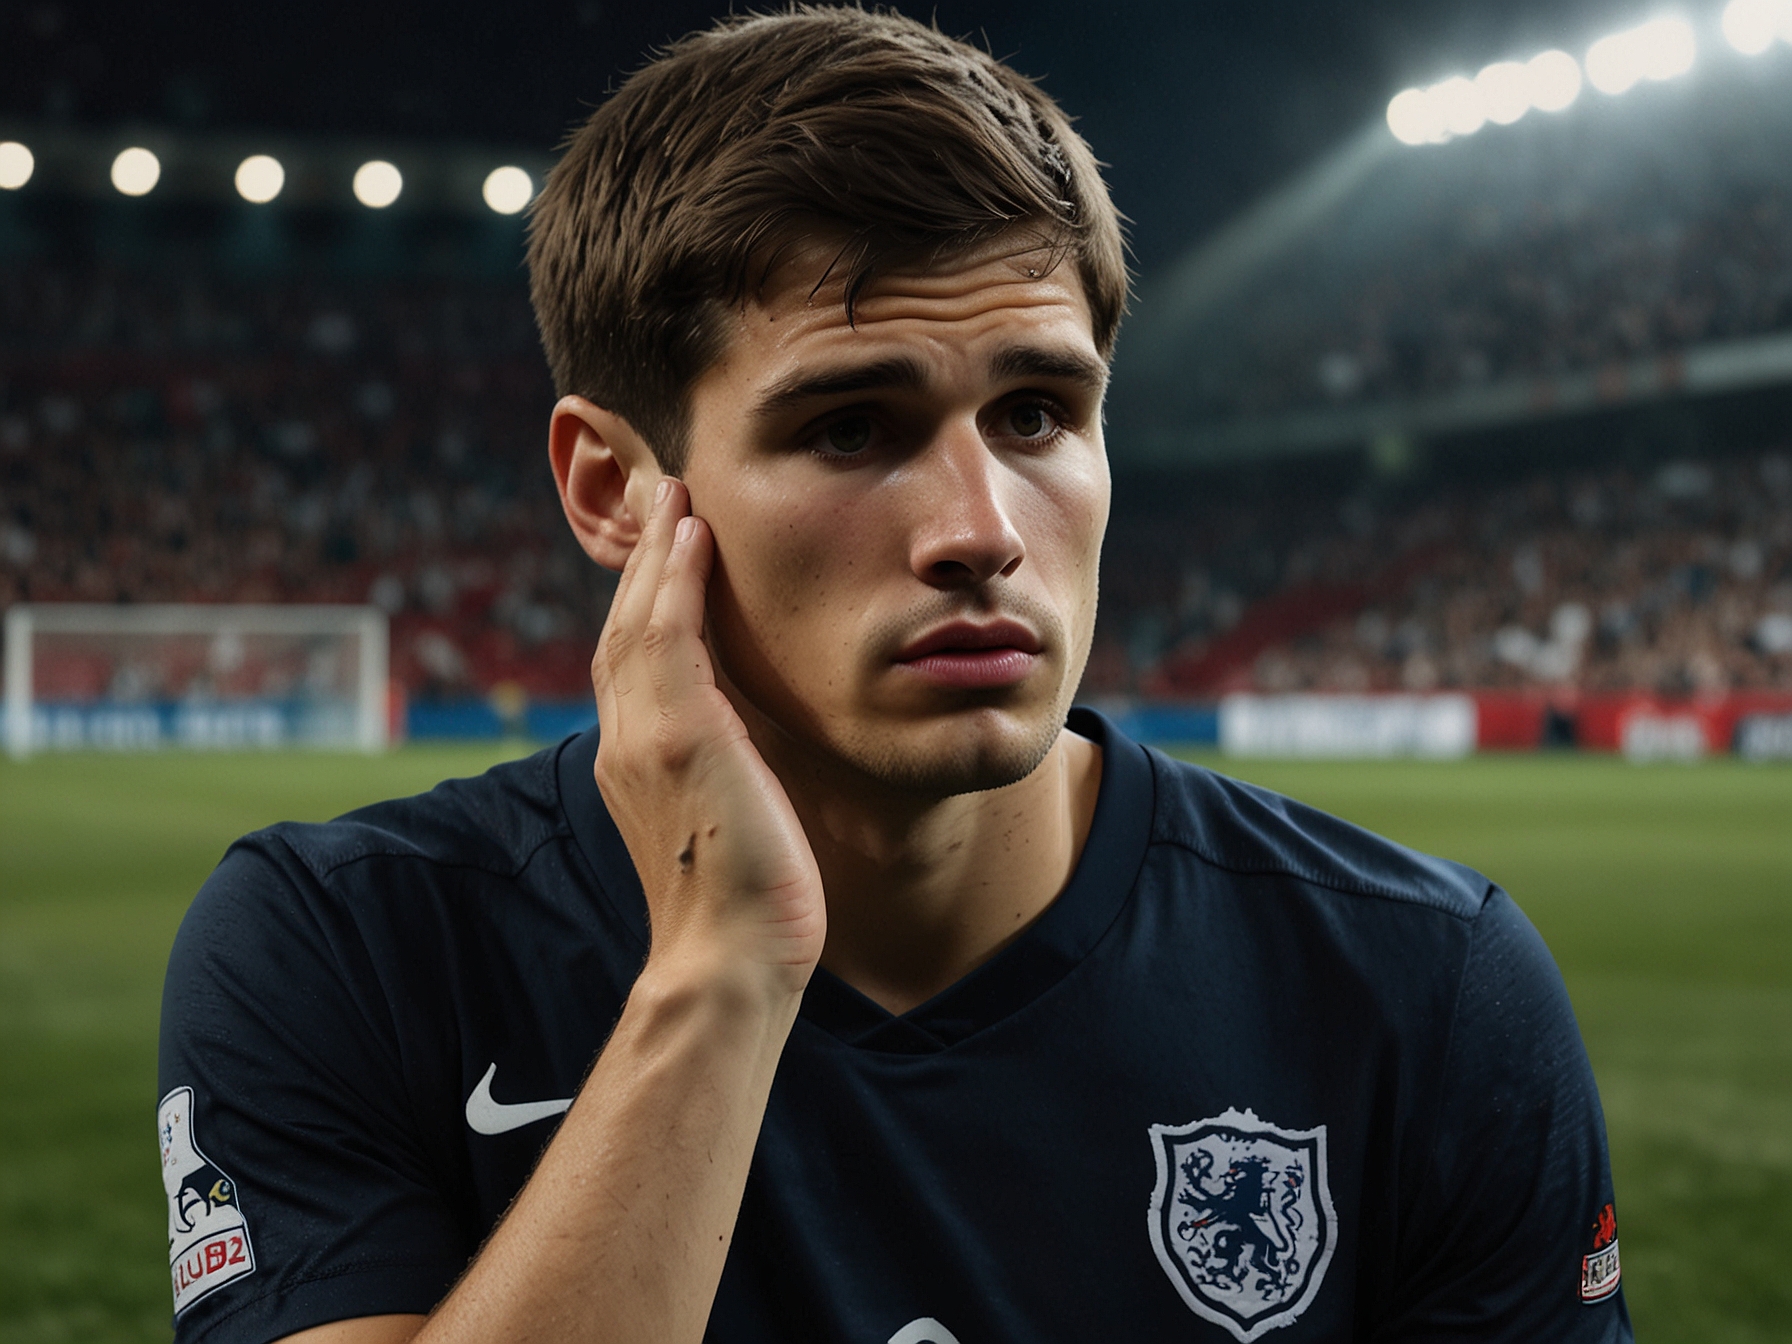 A dejected John Stones on the football field during England's Euro 2024 opener, symbolizing the struggles and criticisms faced by the defender after a poor performance.